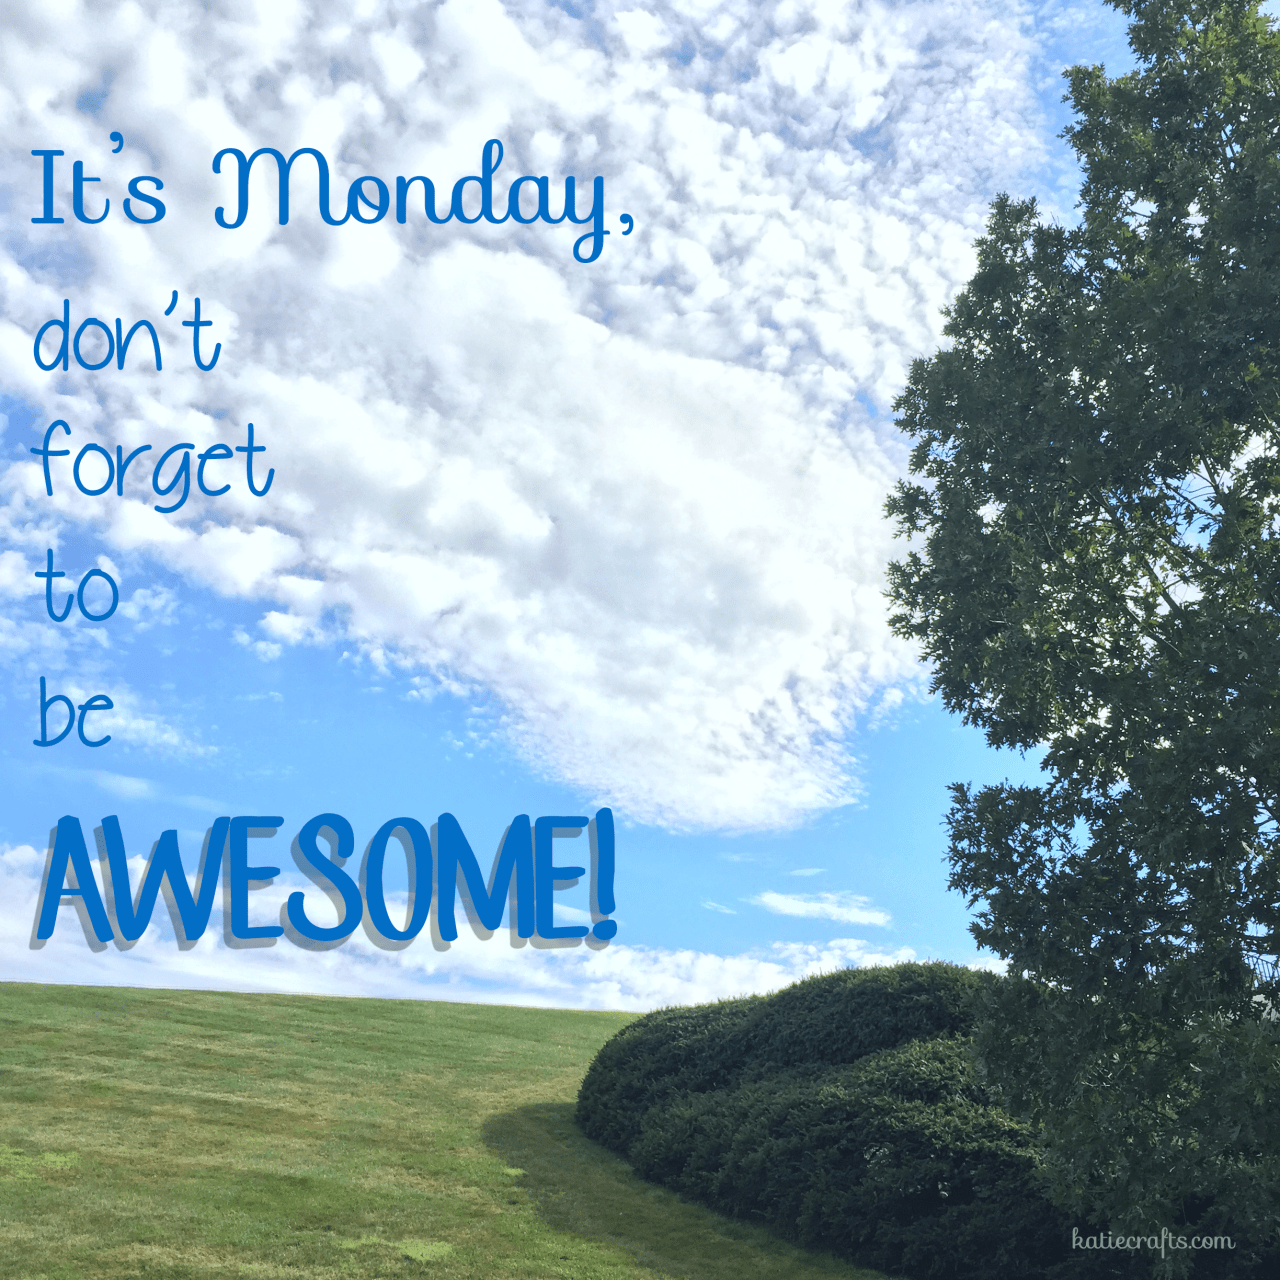 Motivation Monday: Be Awesome! on Katie Crafts; https://www.katiecrafts.com